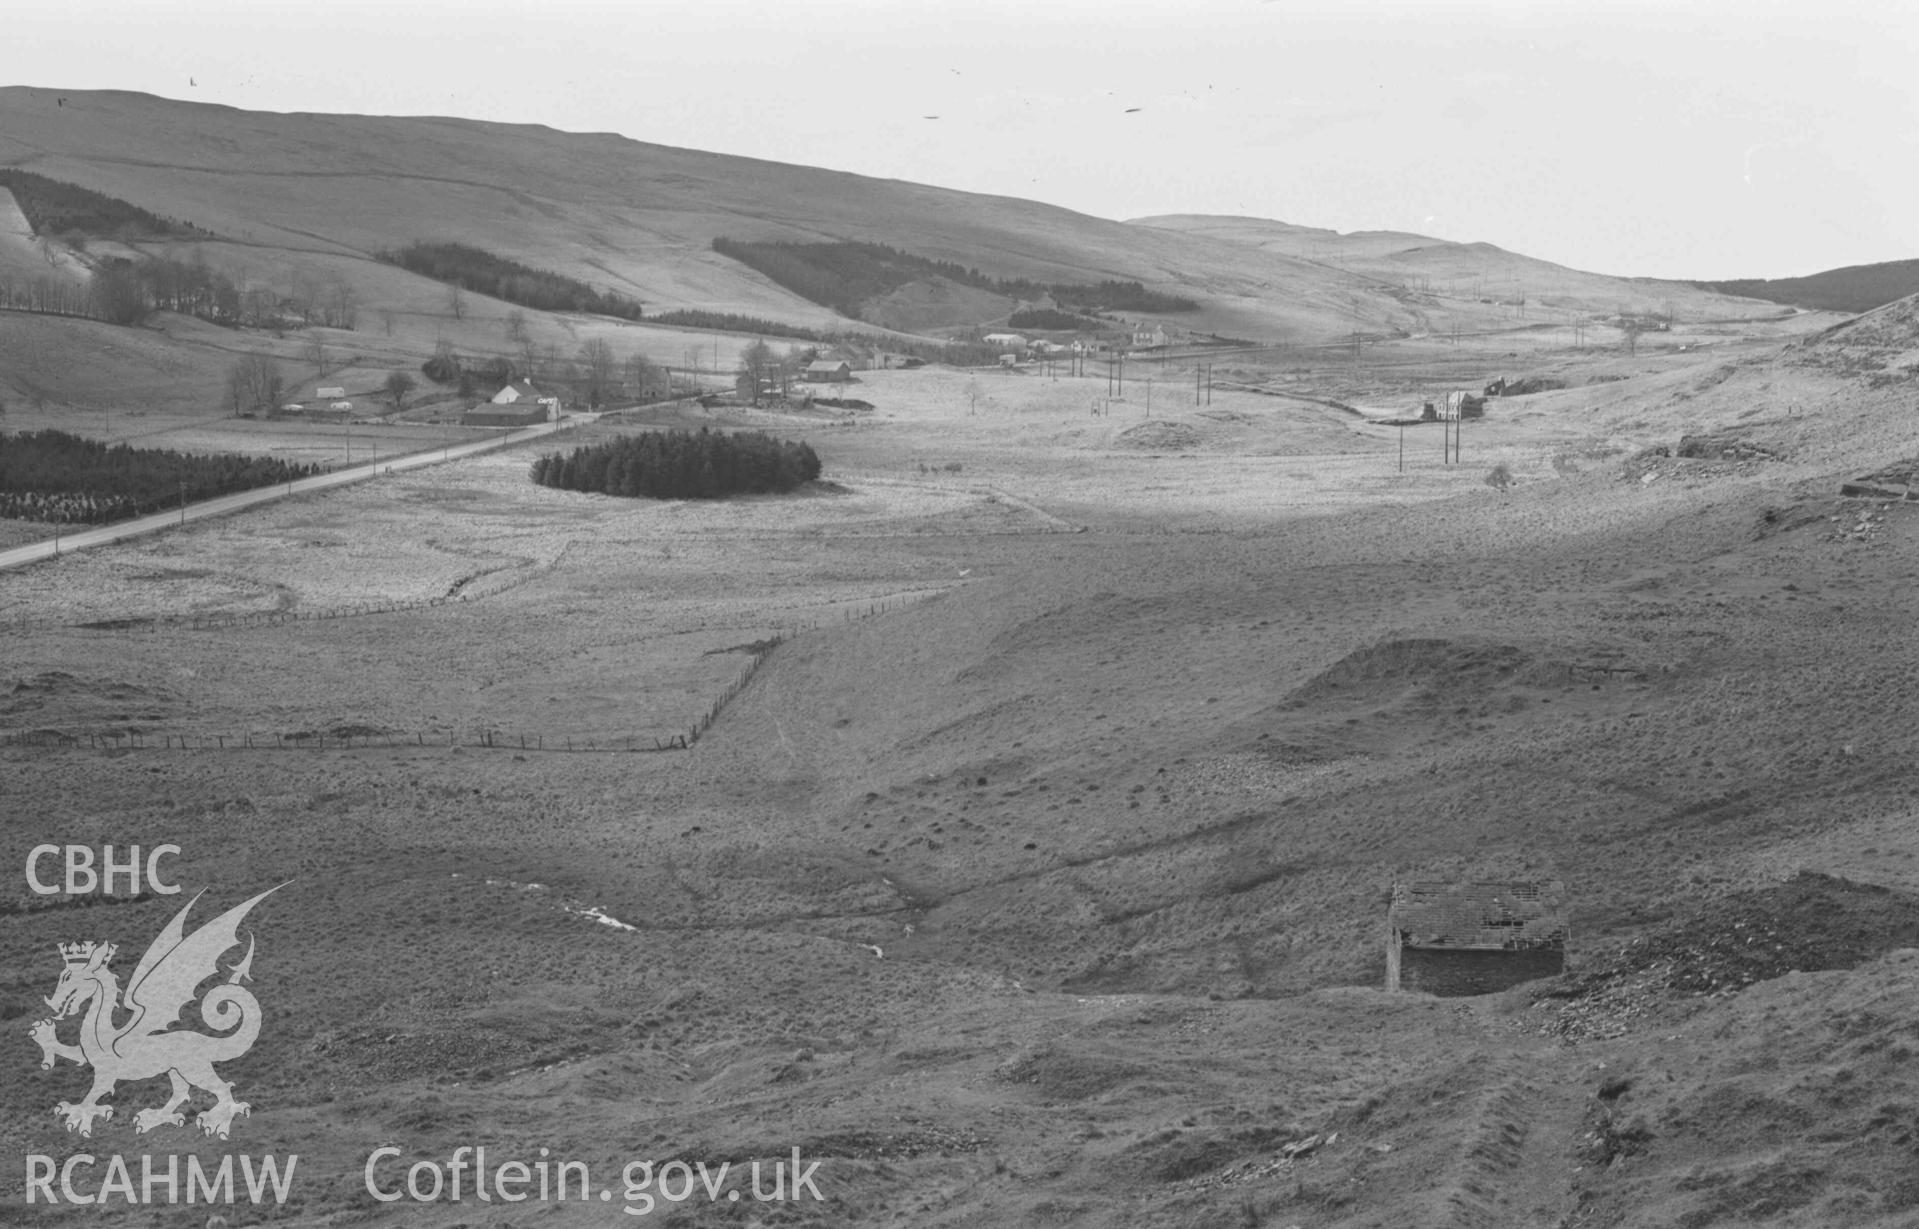 Digital copy of a black and white negative showing view from entrance to quarry behind Ffynnon-Cadno to Llywernog village and leadmine (right). Photographed by Arthur Chater on 2 April 1969. Looking west from Grid Reference SN 7401 8082.